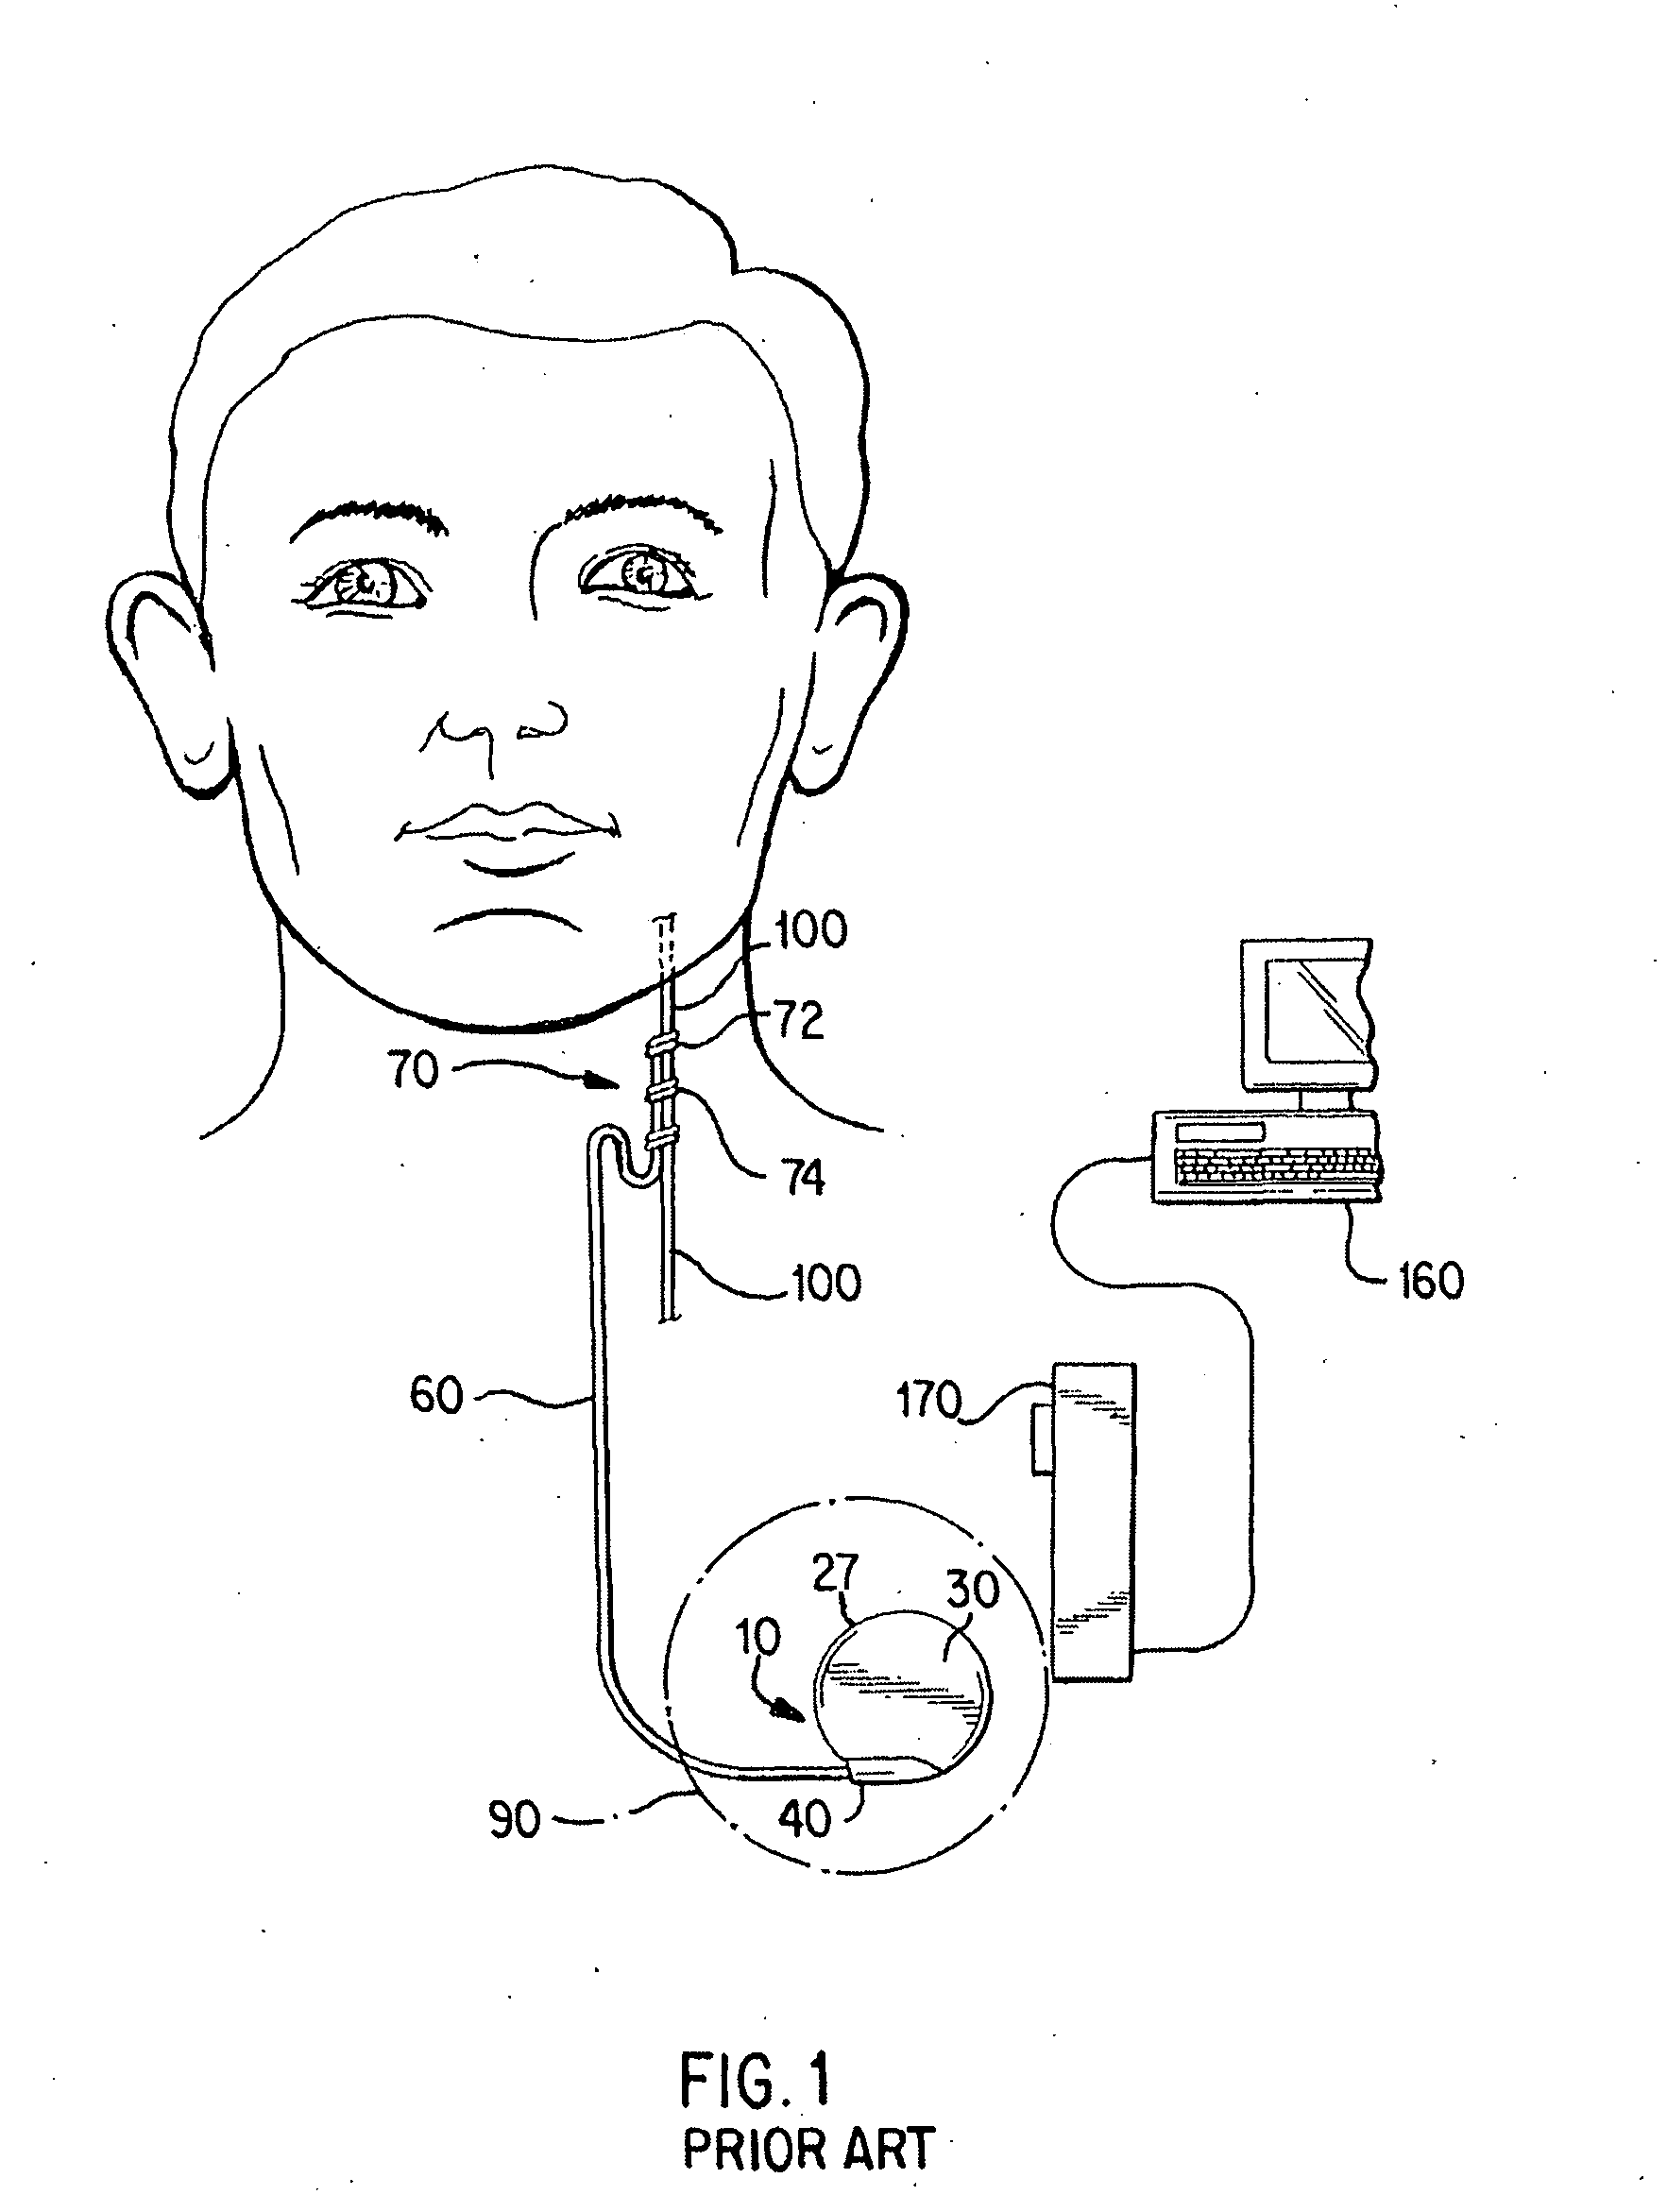 Neurostimulator with activation based on changes in body temperature